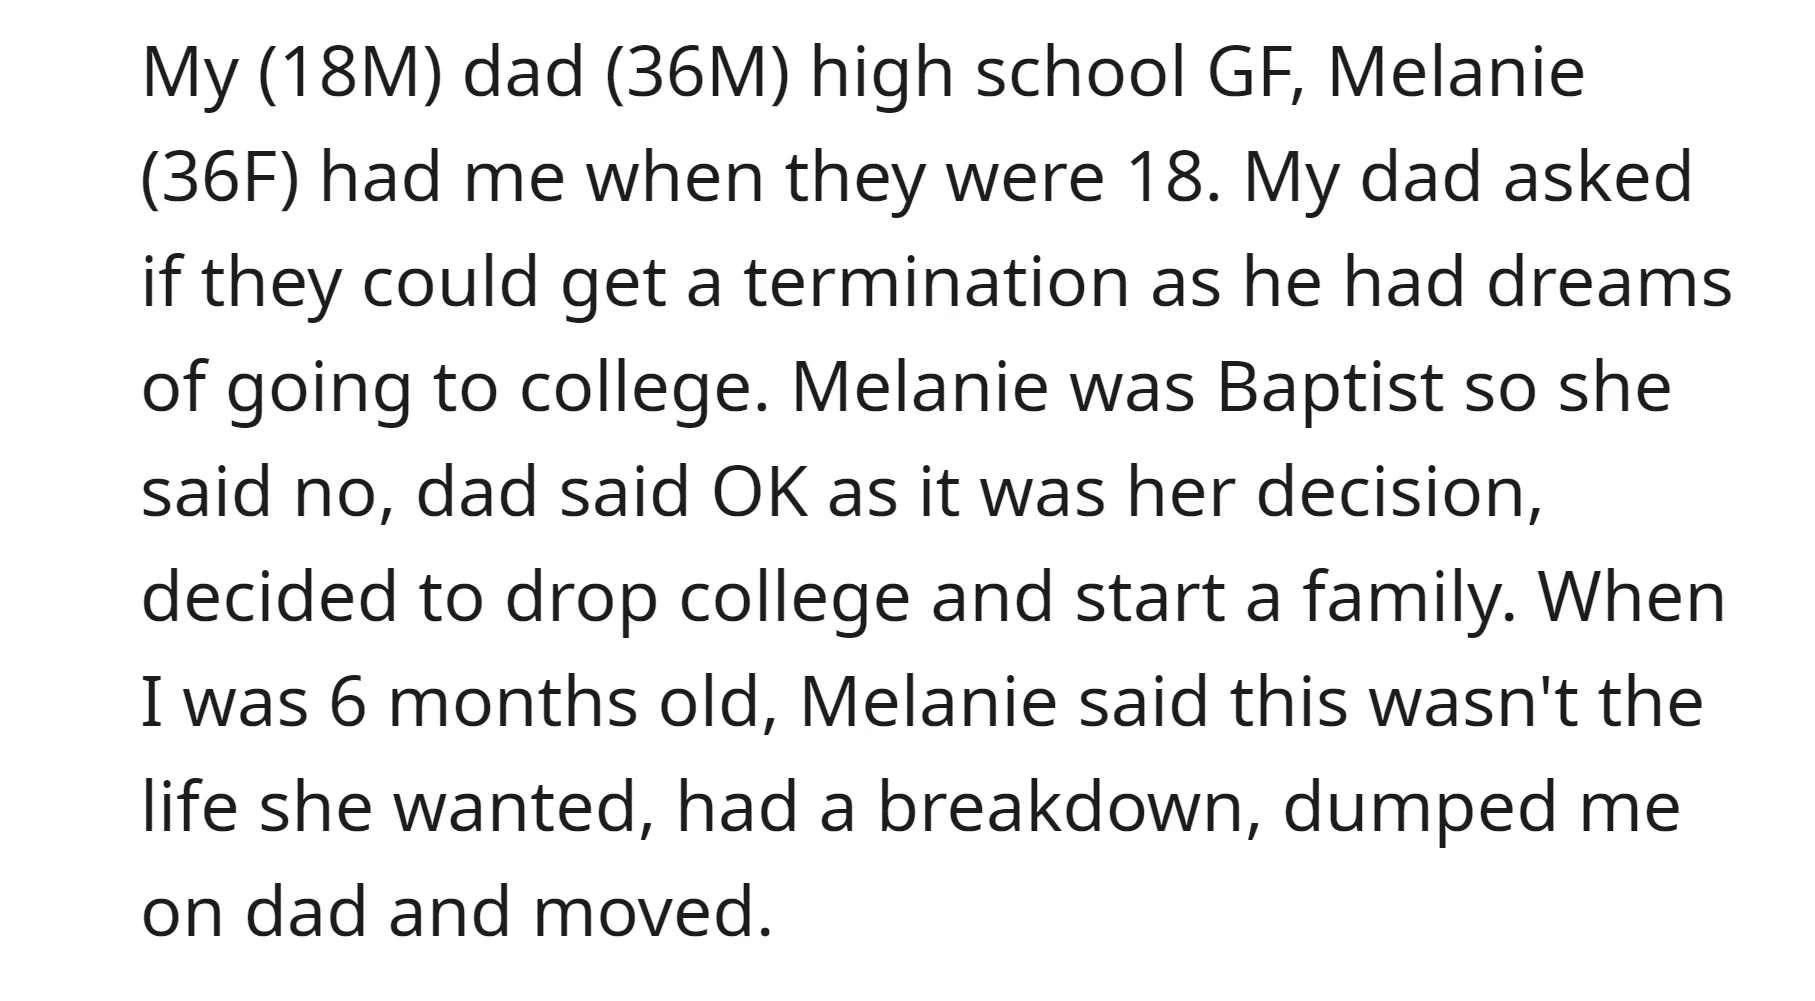 OP's dad and his girlfriend had the OP when they were at high school